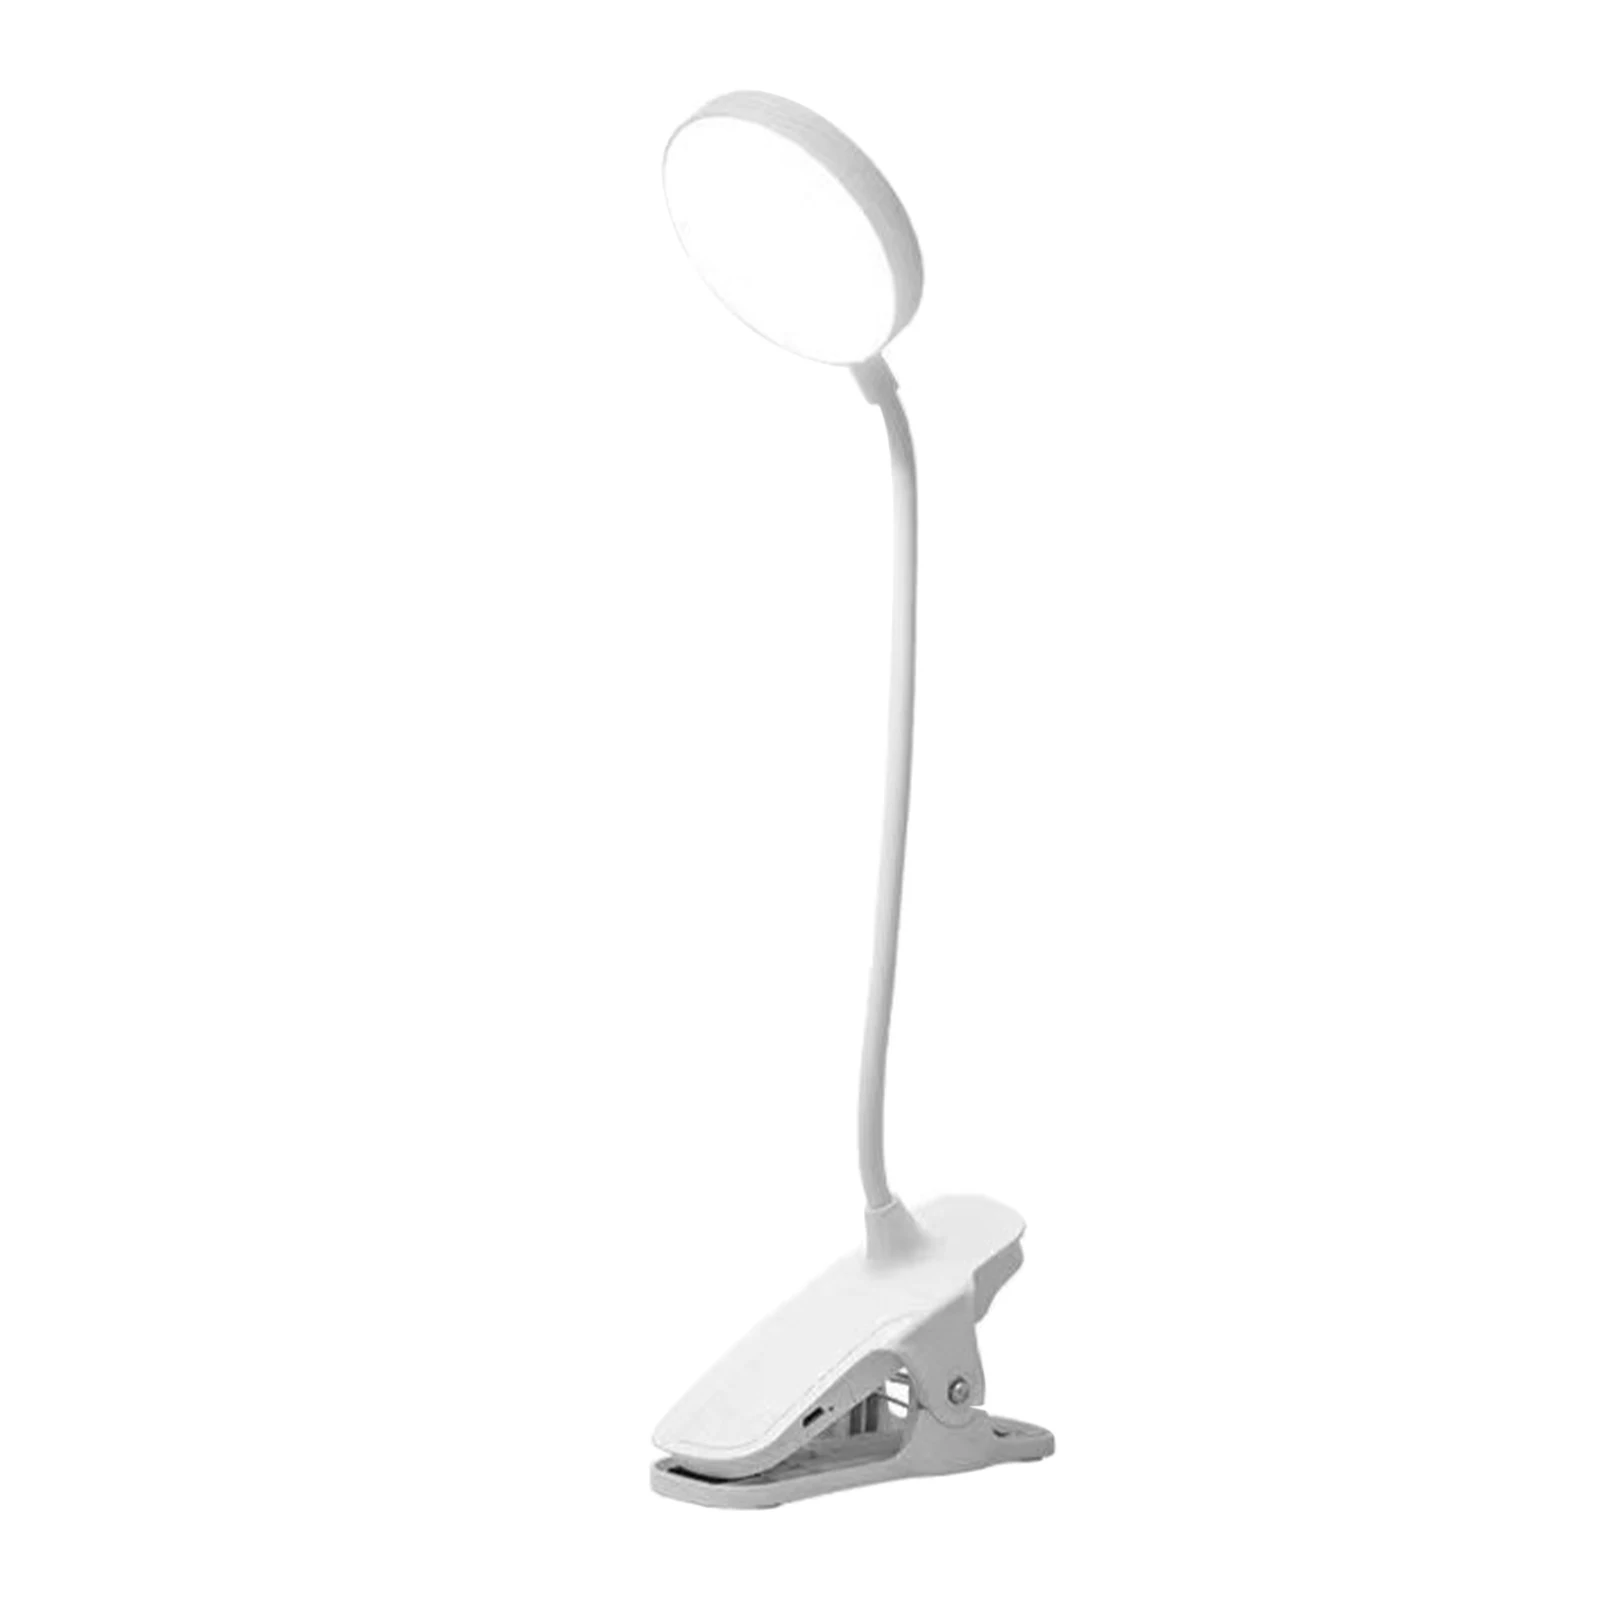 

2 Lighting Modes USB Powered Dormitory Touch Control Reading Clip On Bedroom Flexible Gooseneck Bedside Student LED Desk Lamp